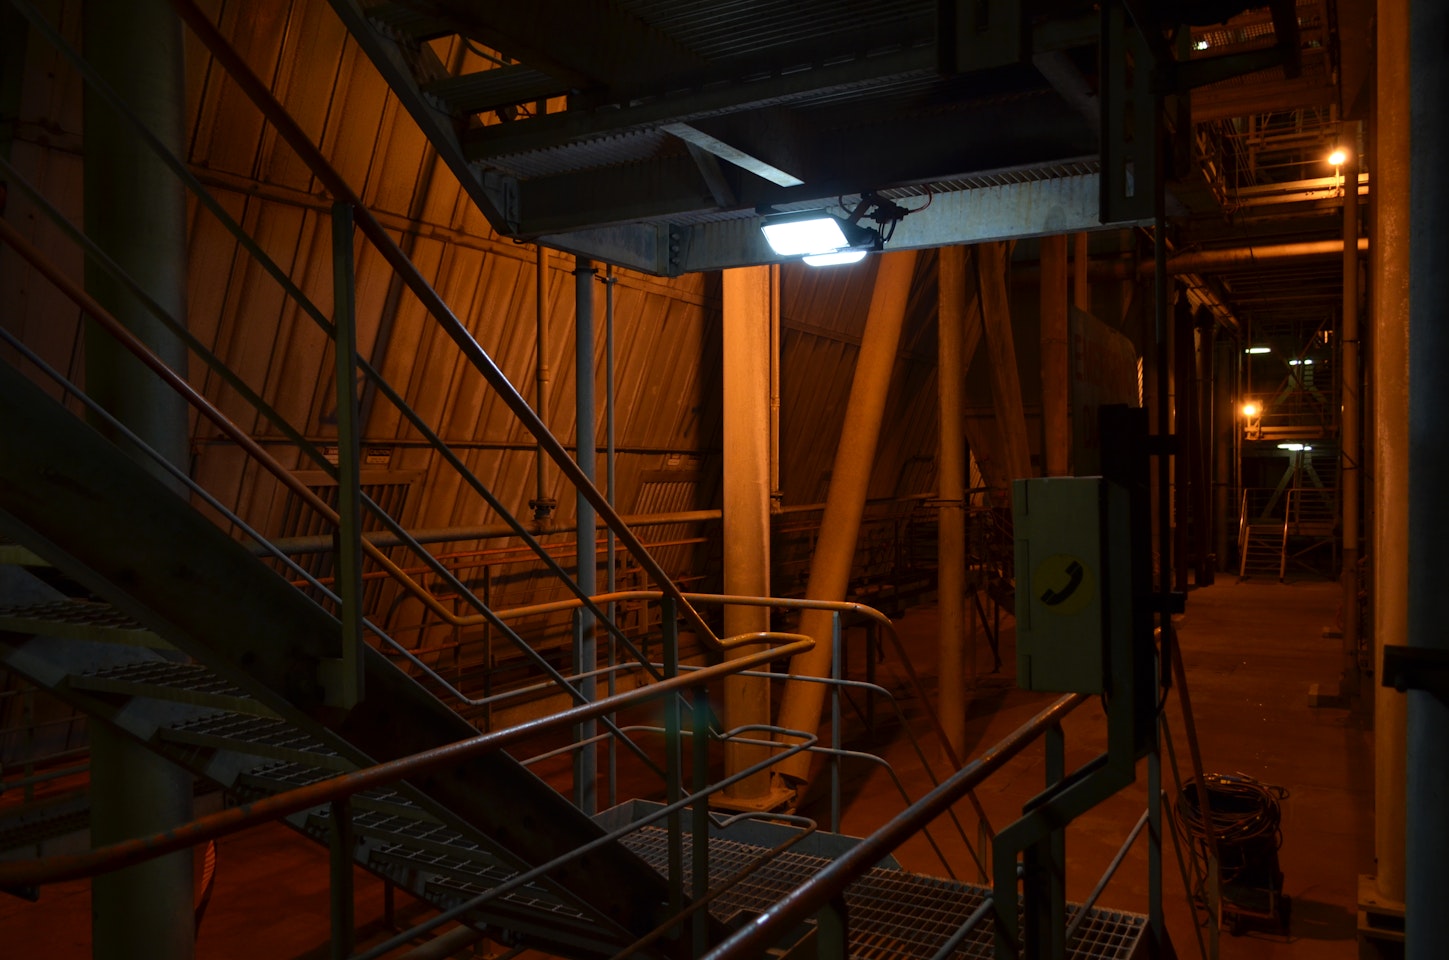 Tunnel Ray LED Tunnel / Low Profile Light in application, installed on a stairwell on a  power station